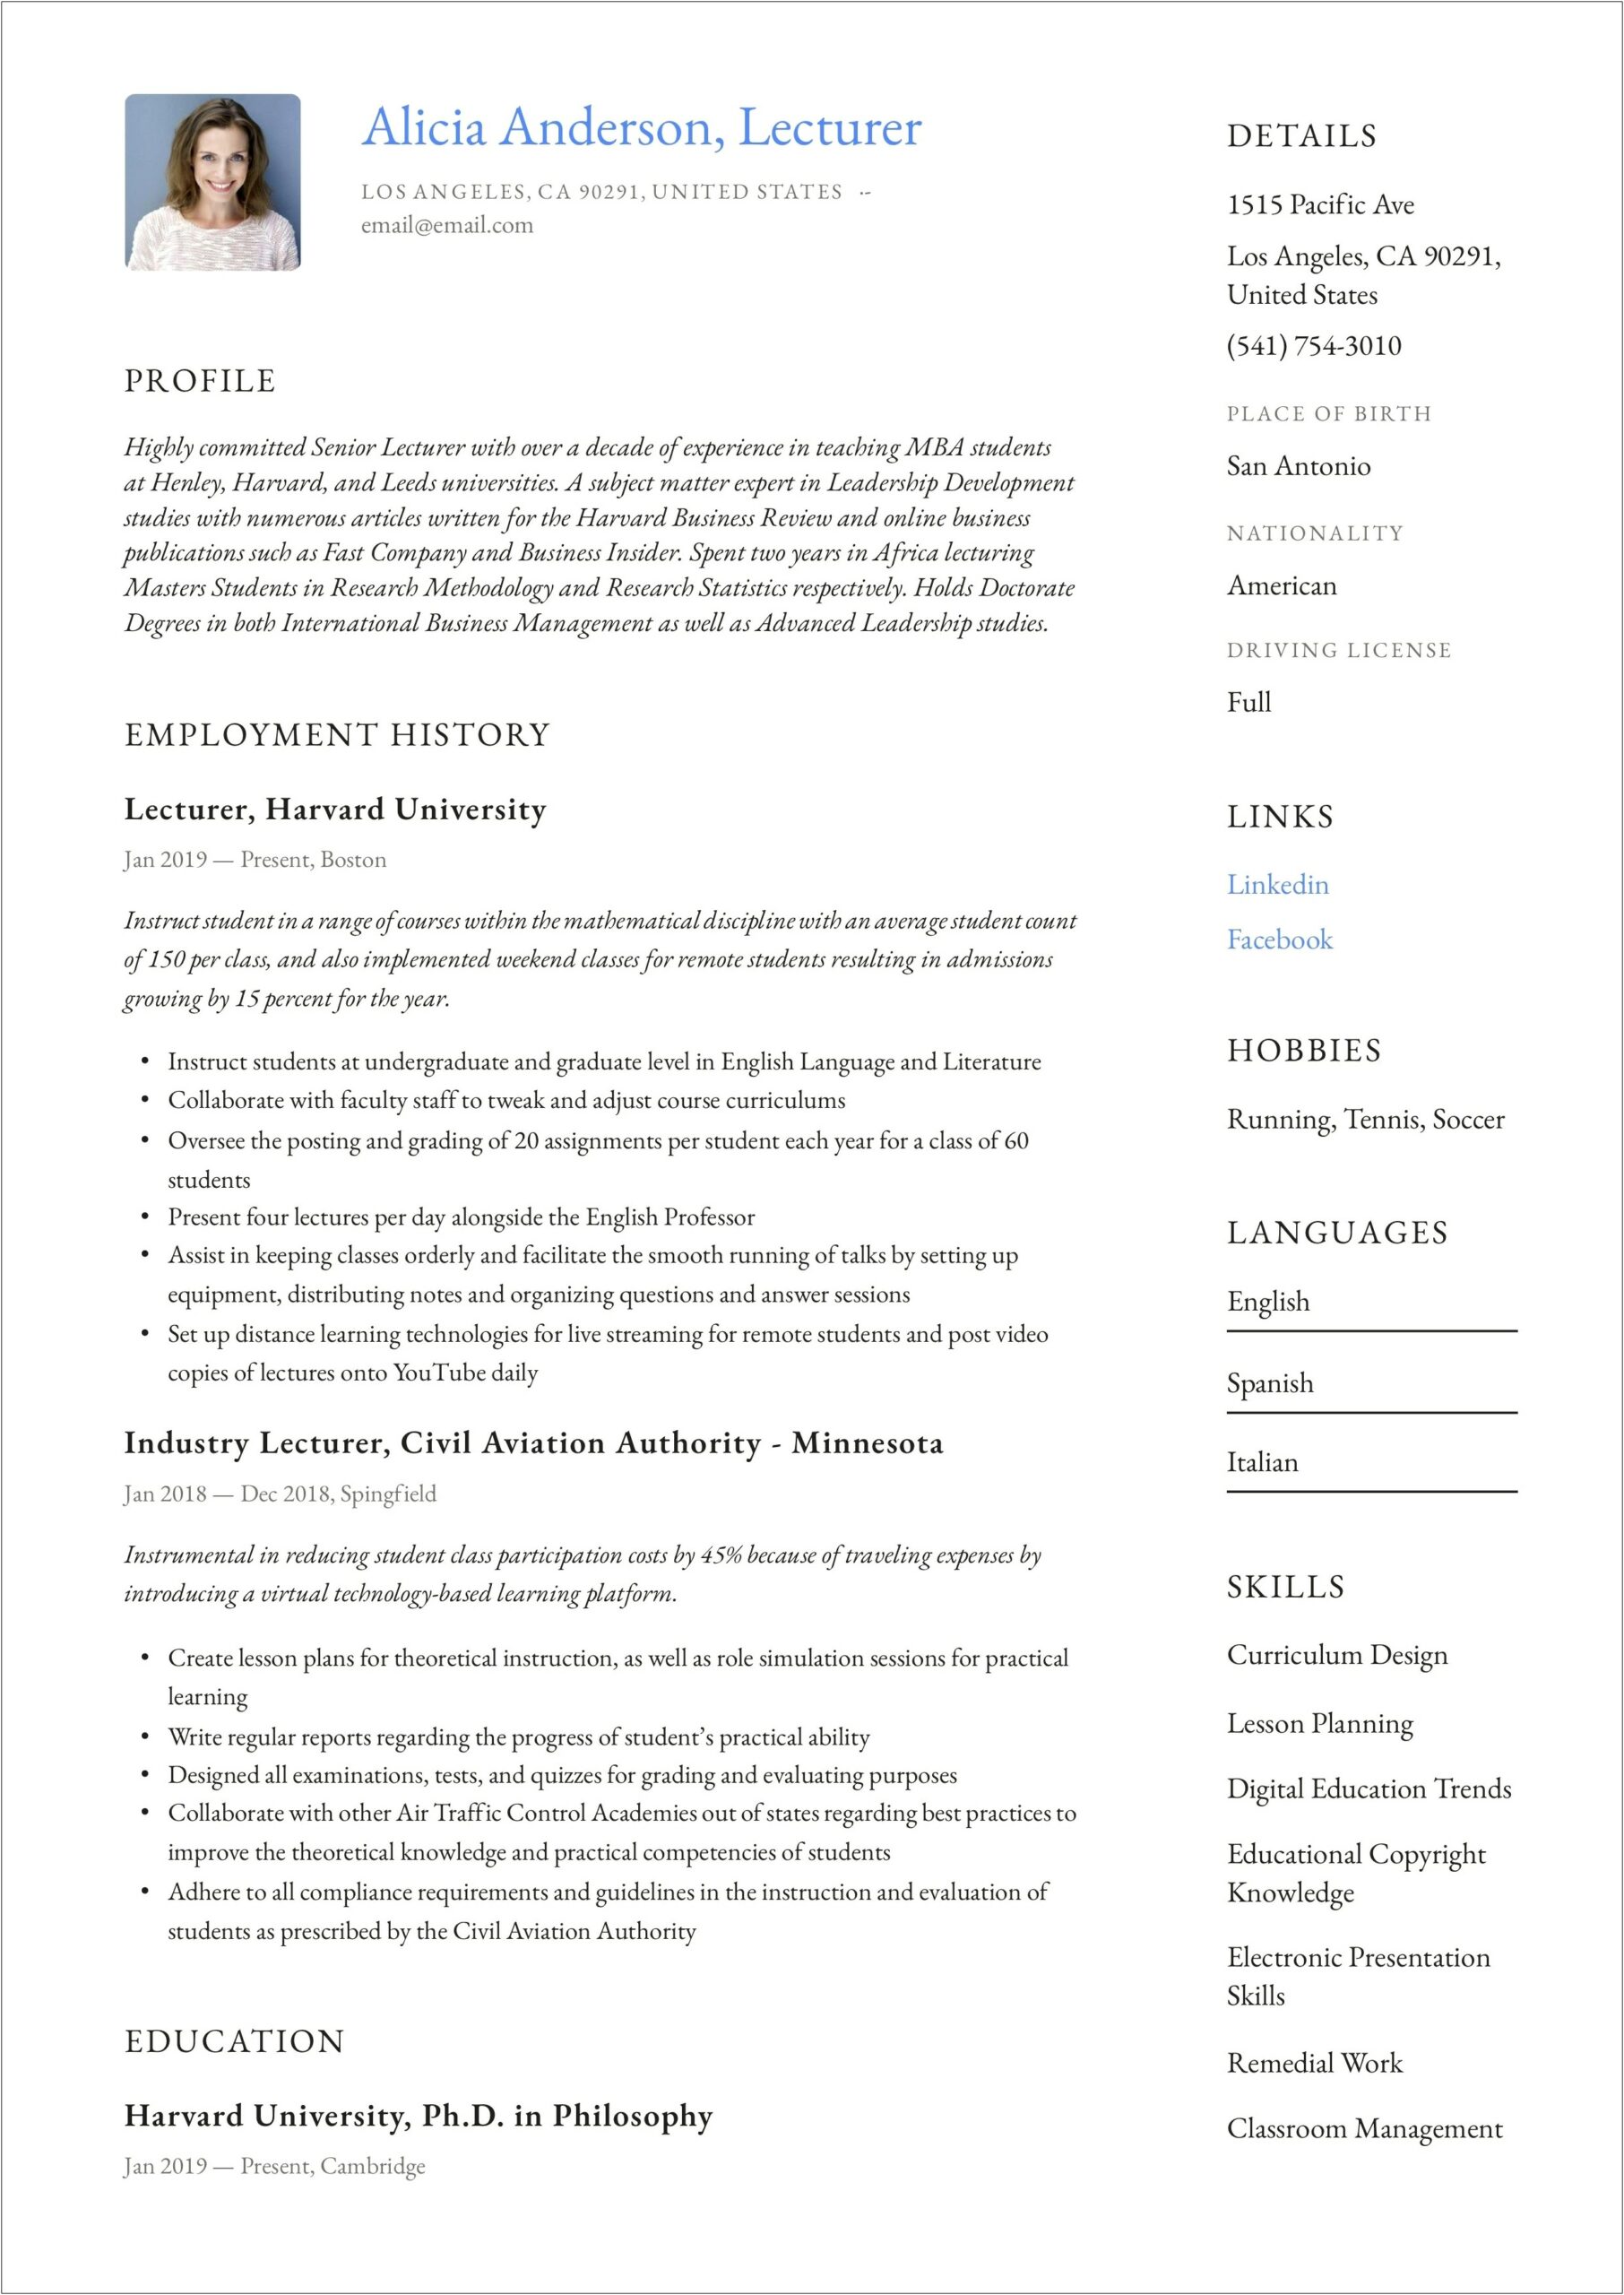 Objectives Of Criminology In Resume